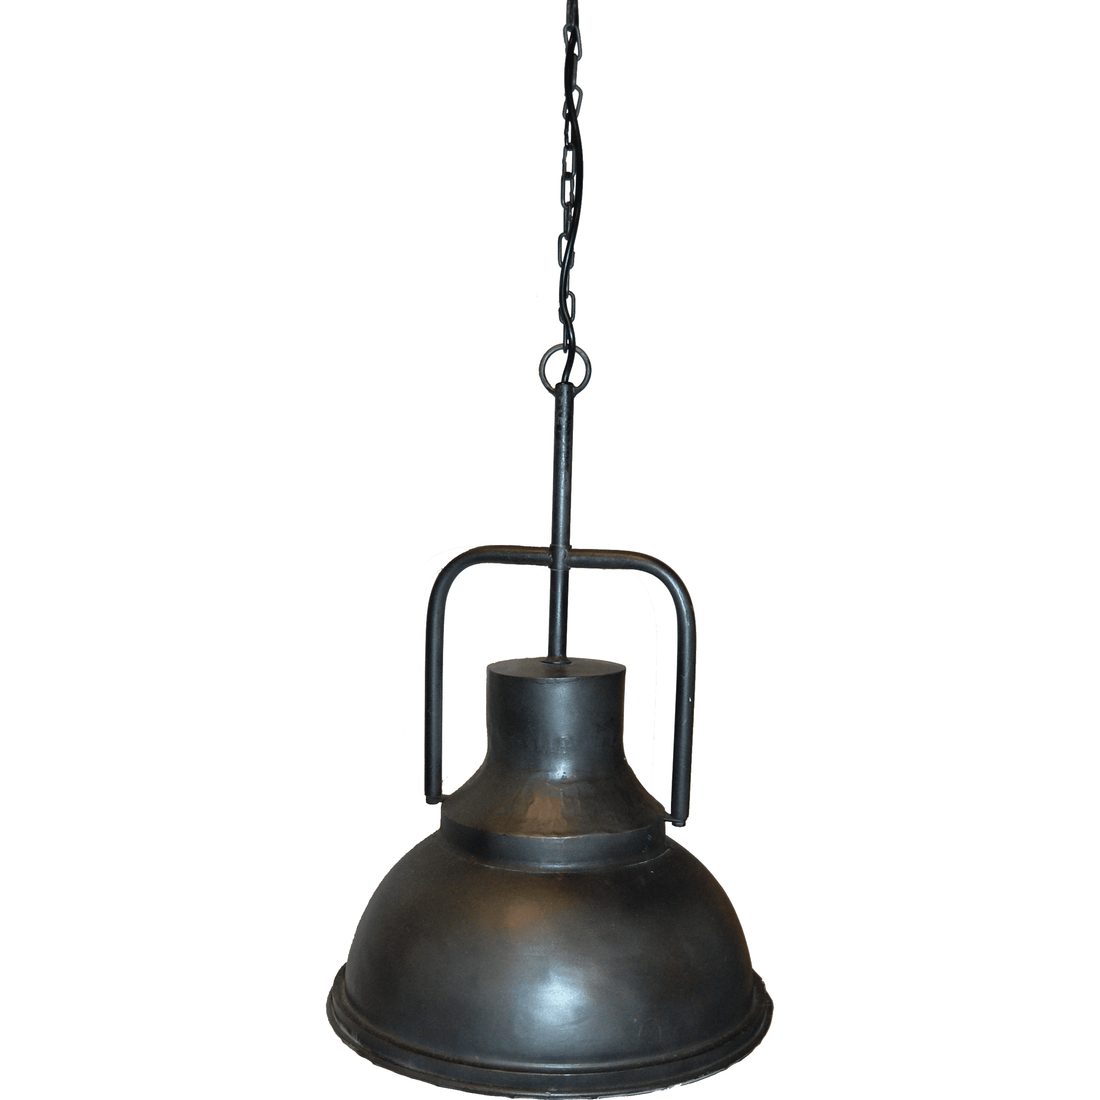 Trademark Living Liam pendant in factory style - zinc